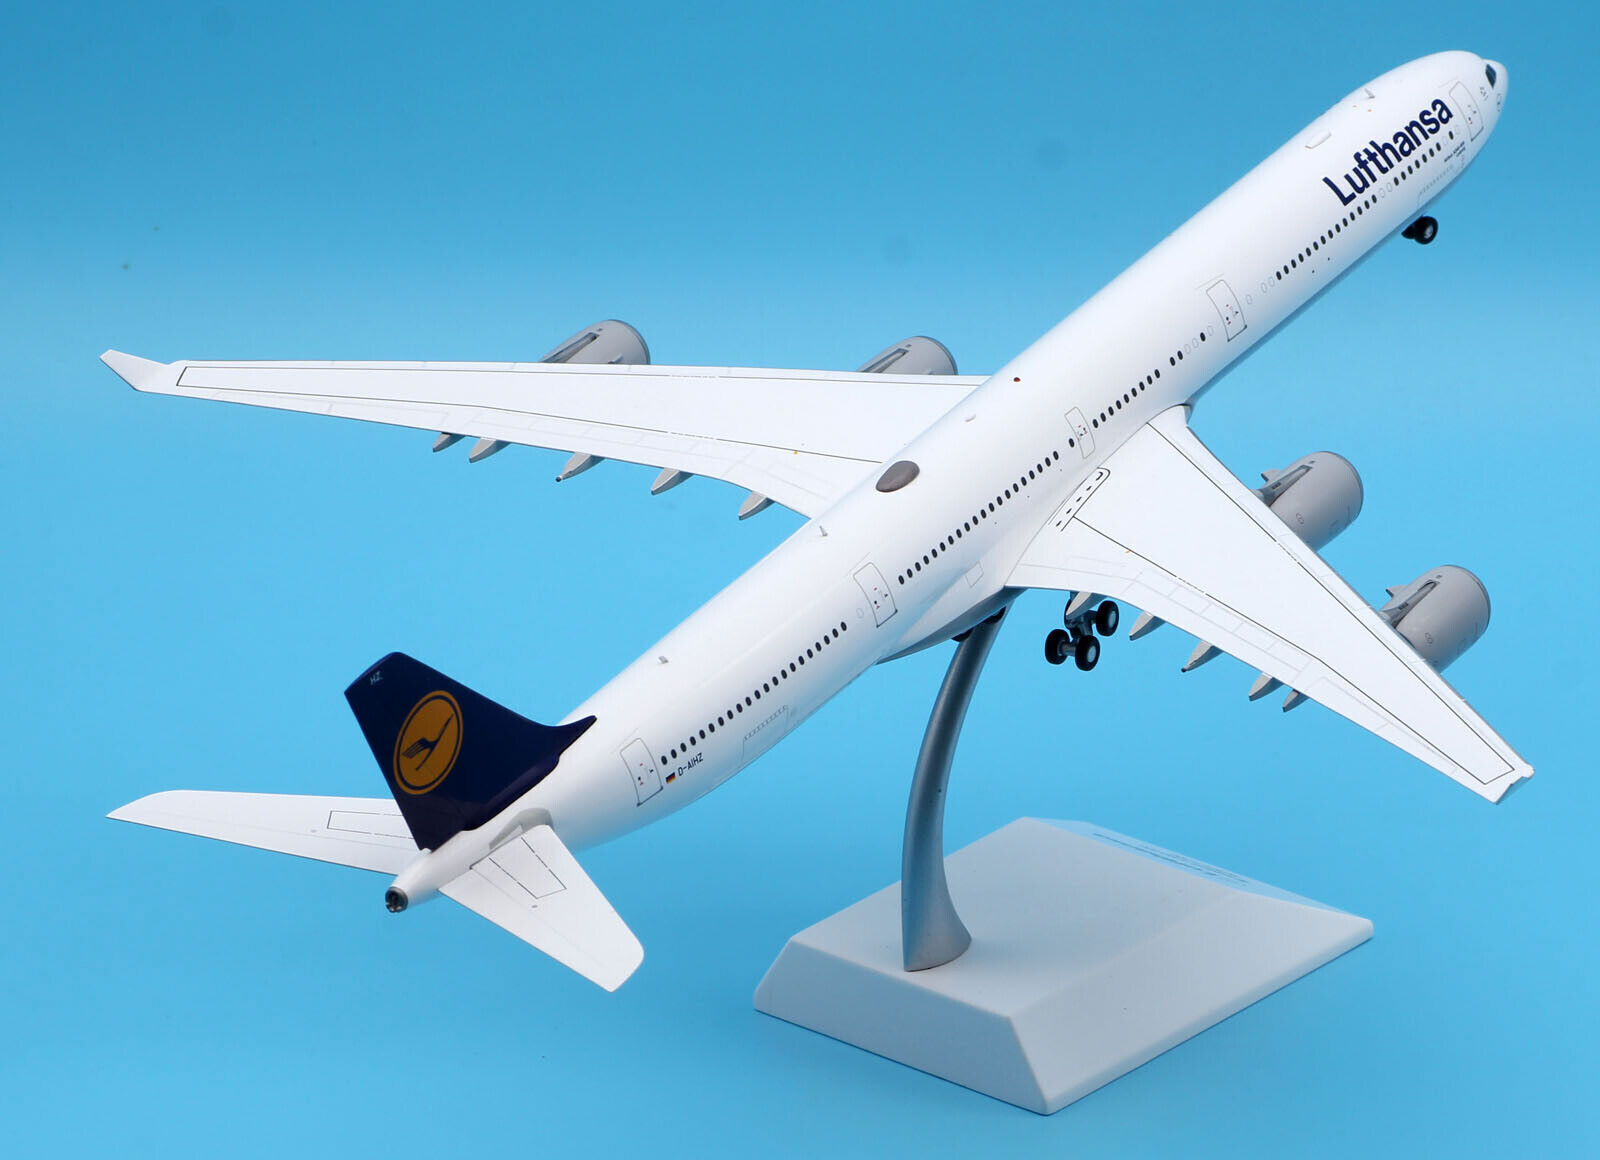 1:200 JC Wings Lufthansa Airlines Airbus A340-600 Diecast Aircraft Model D-AIHZ